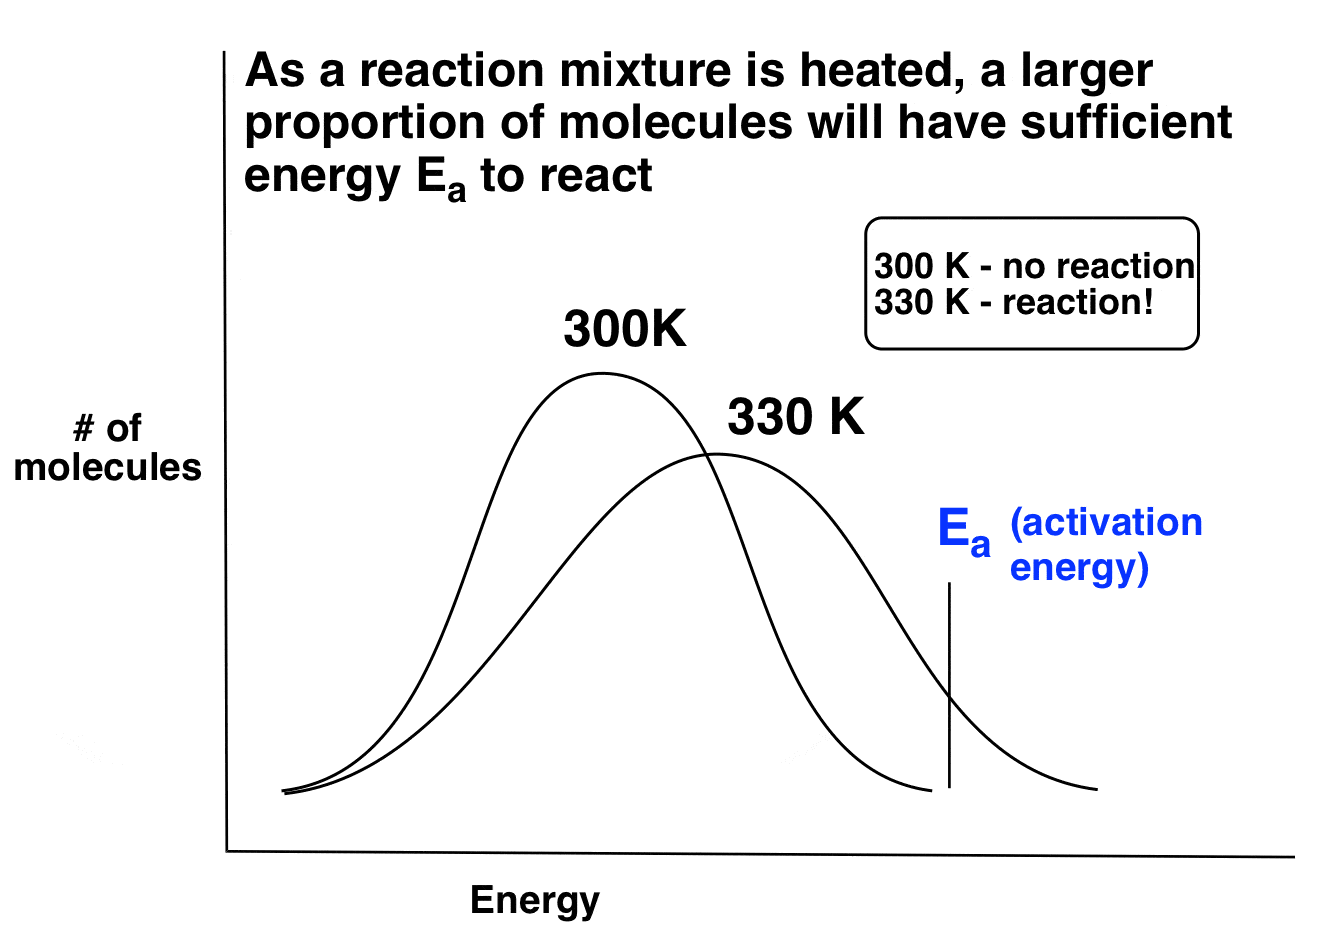 as-reaction-mixture-is-heated-larger-proportion-of-molecules-have-sufficient-energy-activation-energy-to-react-300-k-versus-330-k